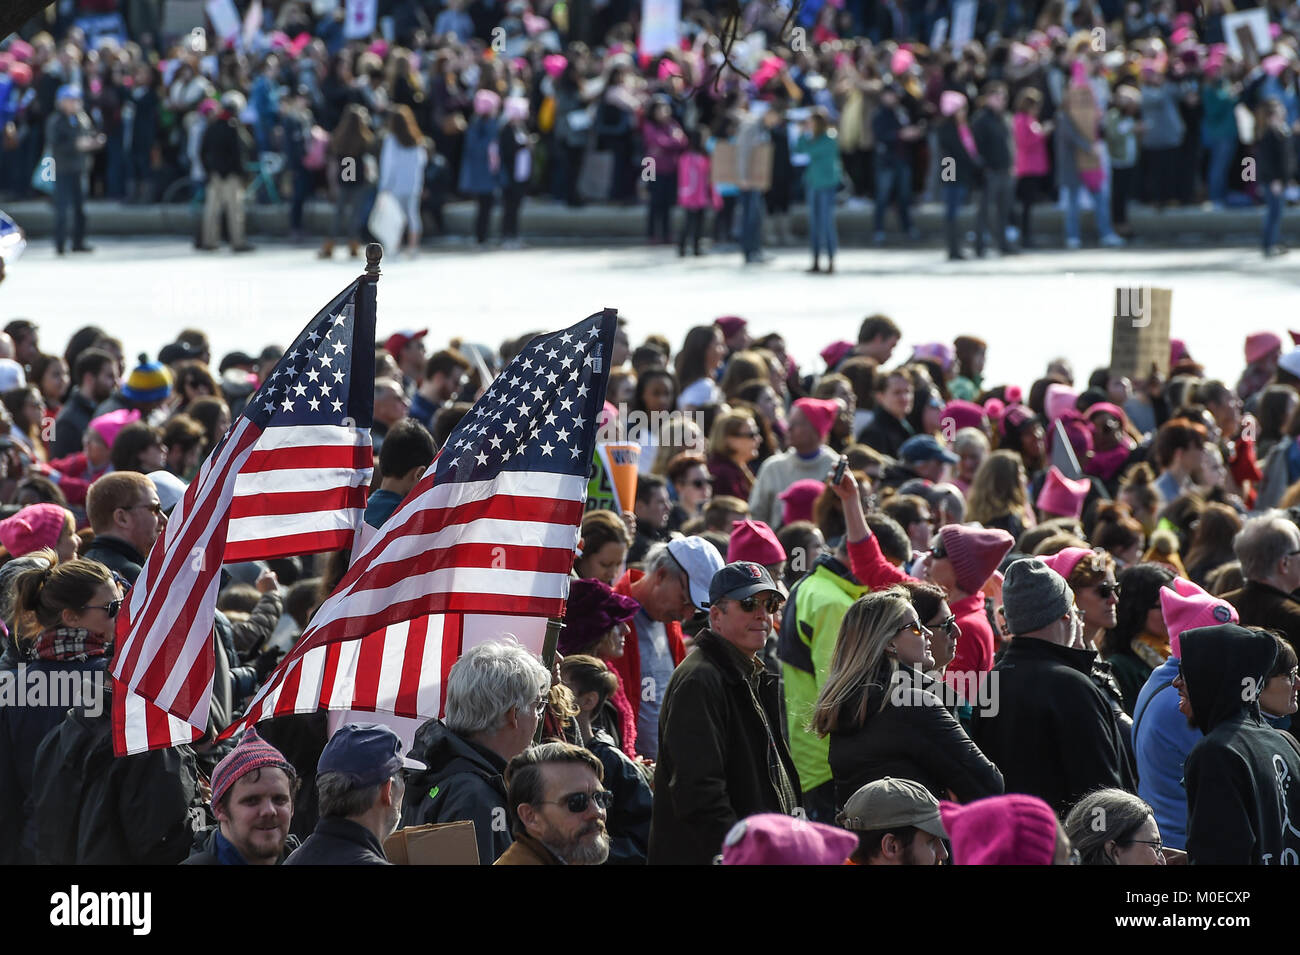 Jan. 20th Jan, 2018. Two US flags march in the foreground as protesters head toward the White House during the Women's March around Lincoln Memorial in Washington, DC, on Jan. 20, 2018 in Washington Credit: csm/Alamy Live News Stock Photo